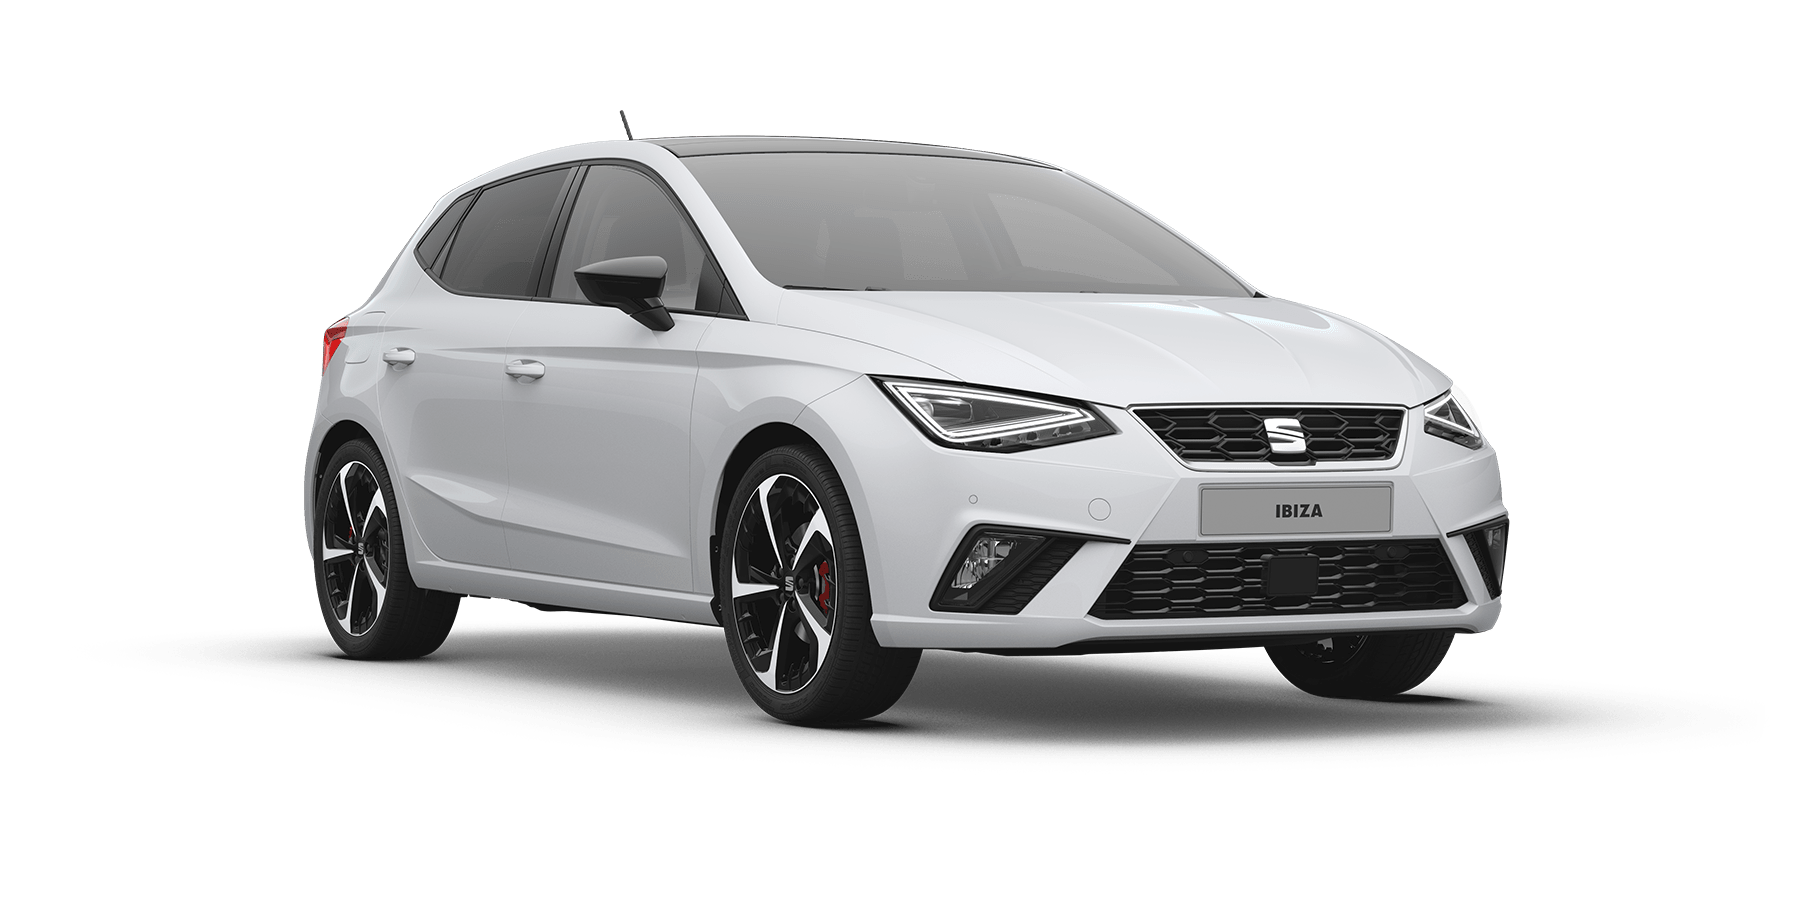 https://www.seat.co.uk/content/dam/countries/gb/seat-website/models/ibiza-pa/exterior-colours/new-seat-ibiza-nevada-white-colour.png